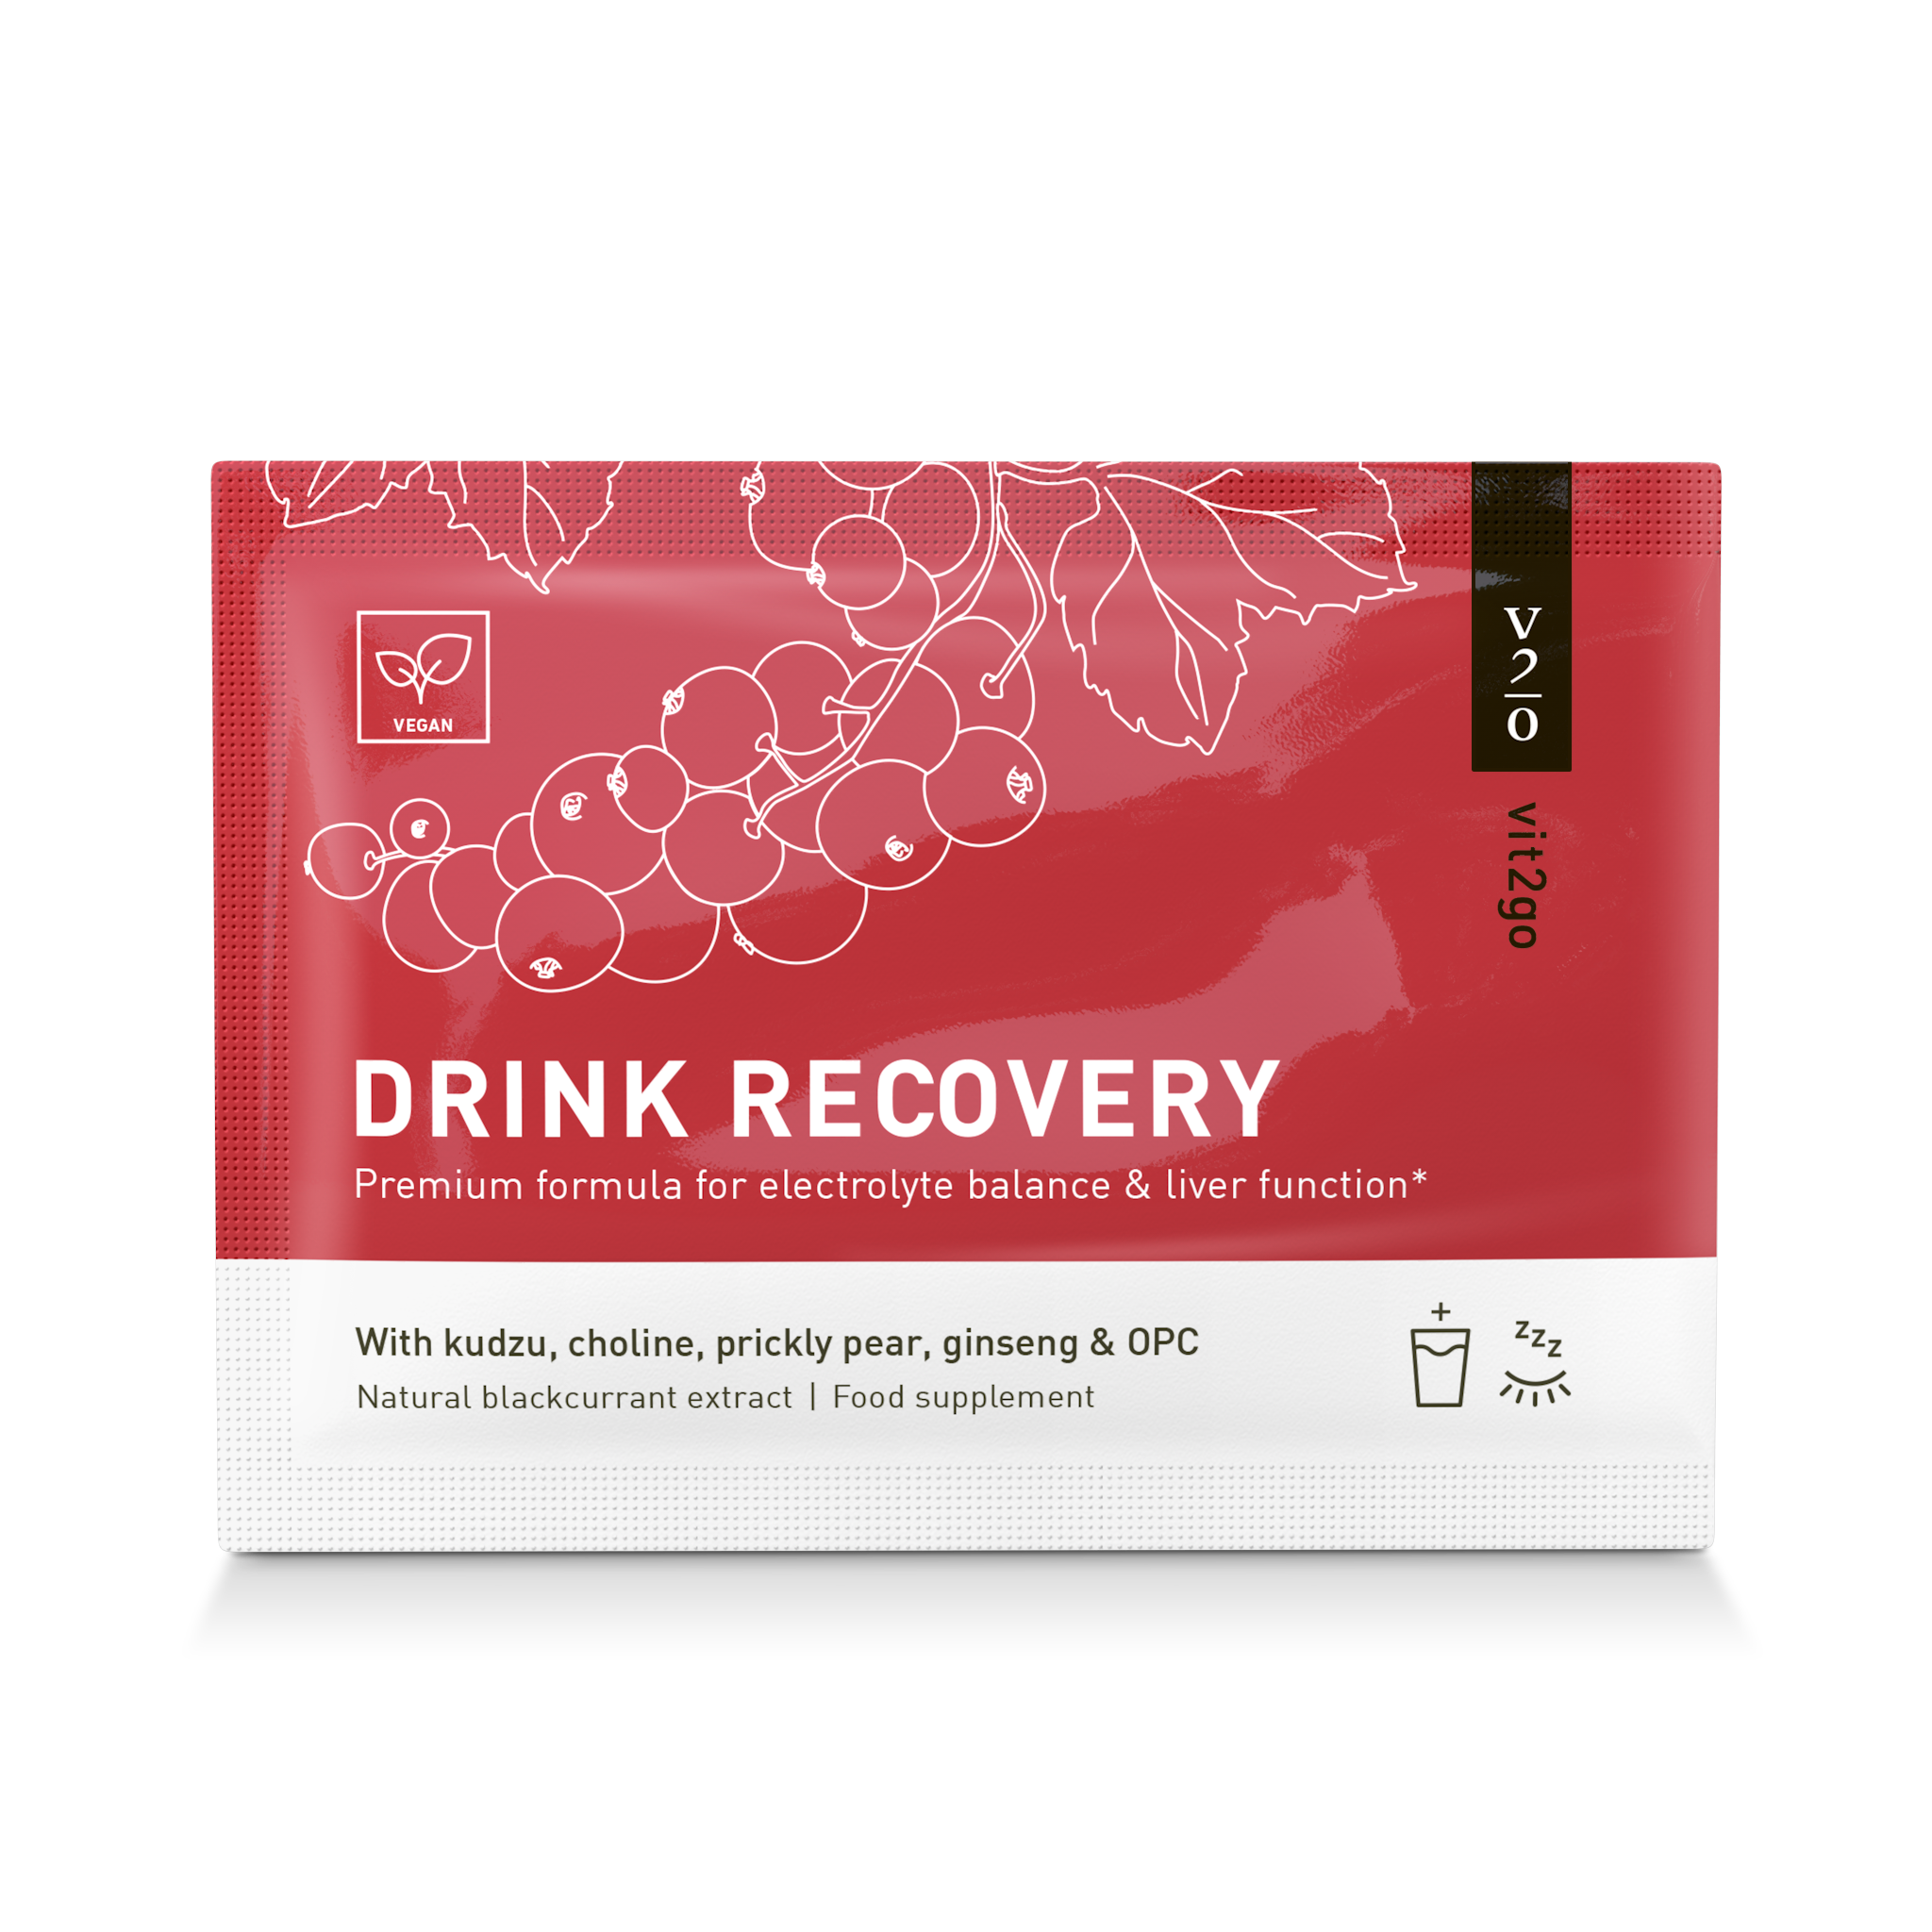 DRINK RECOVERY – SINGLE PORTION